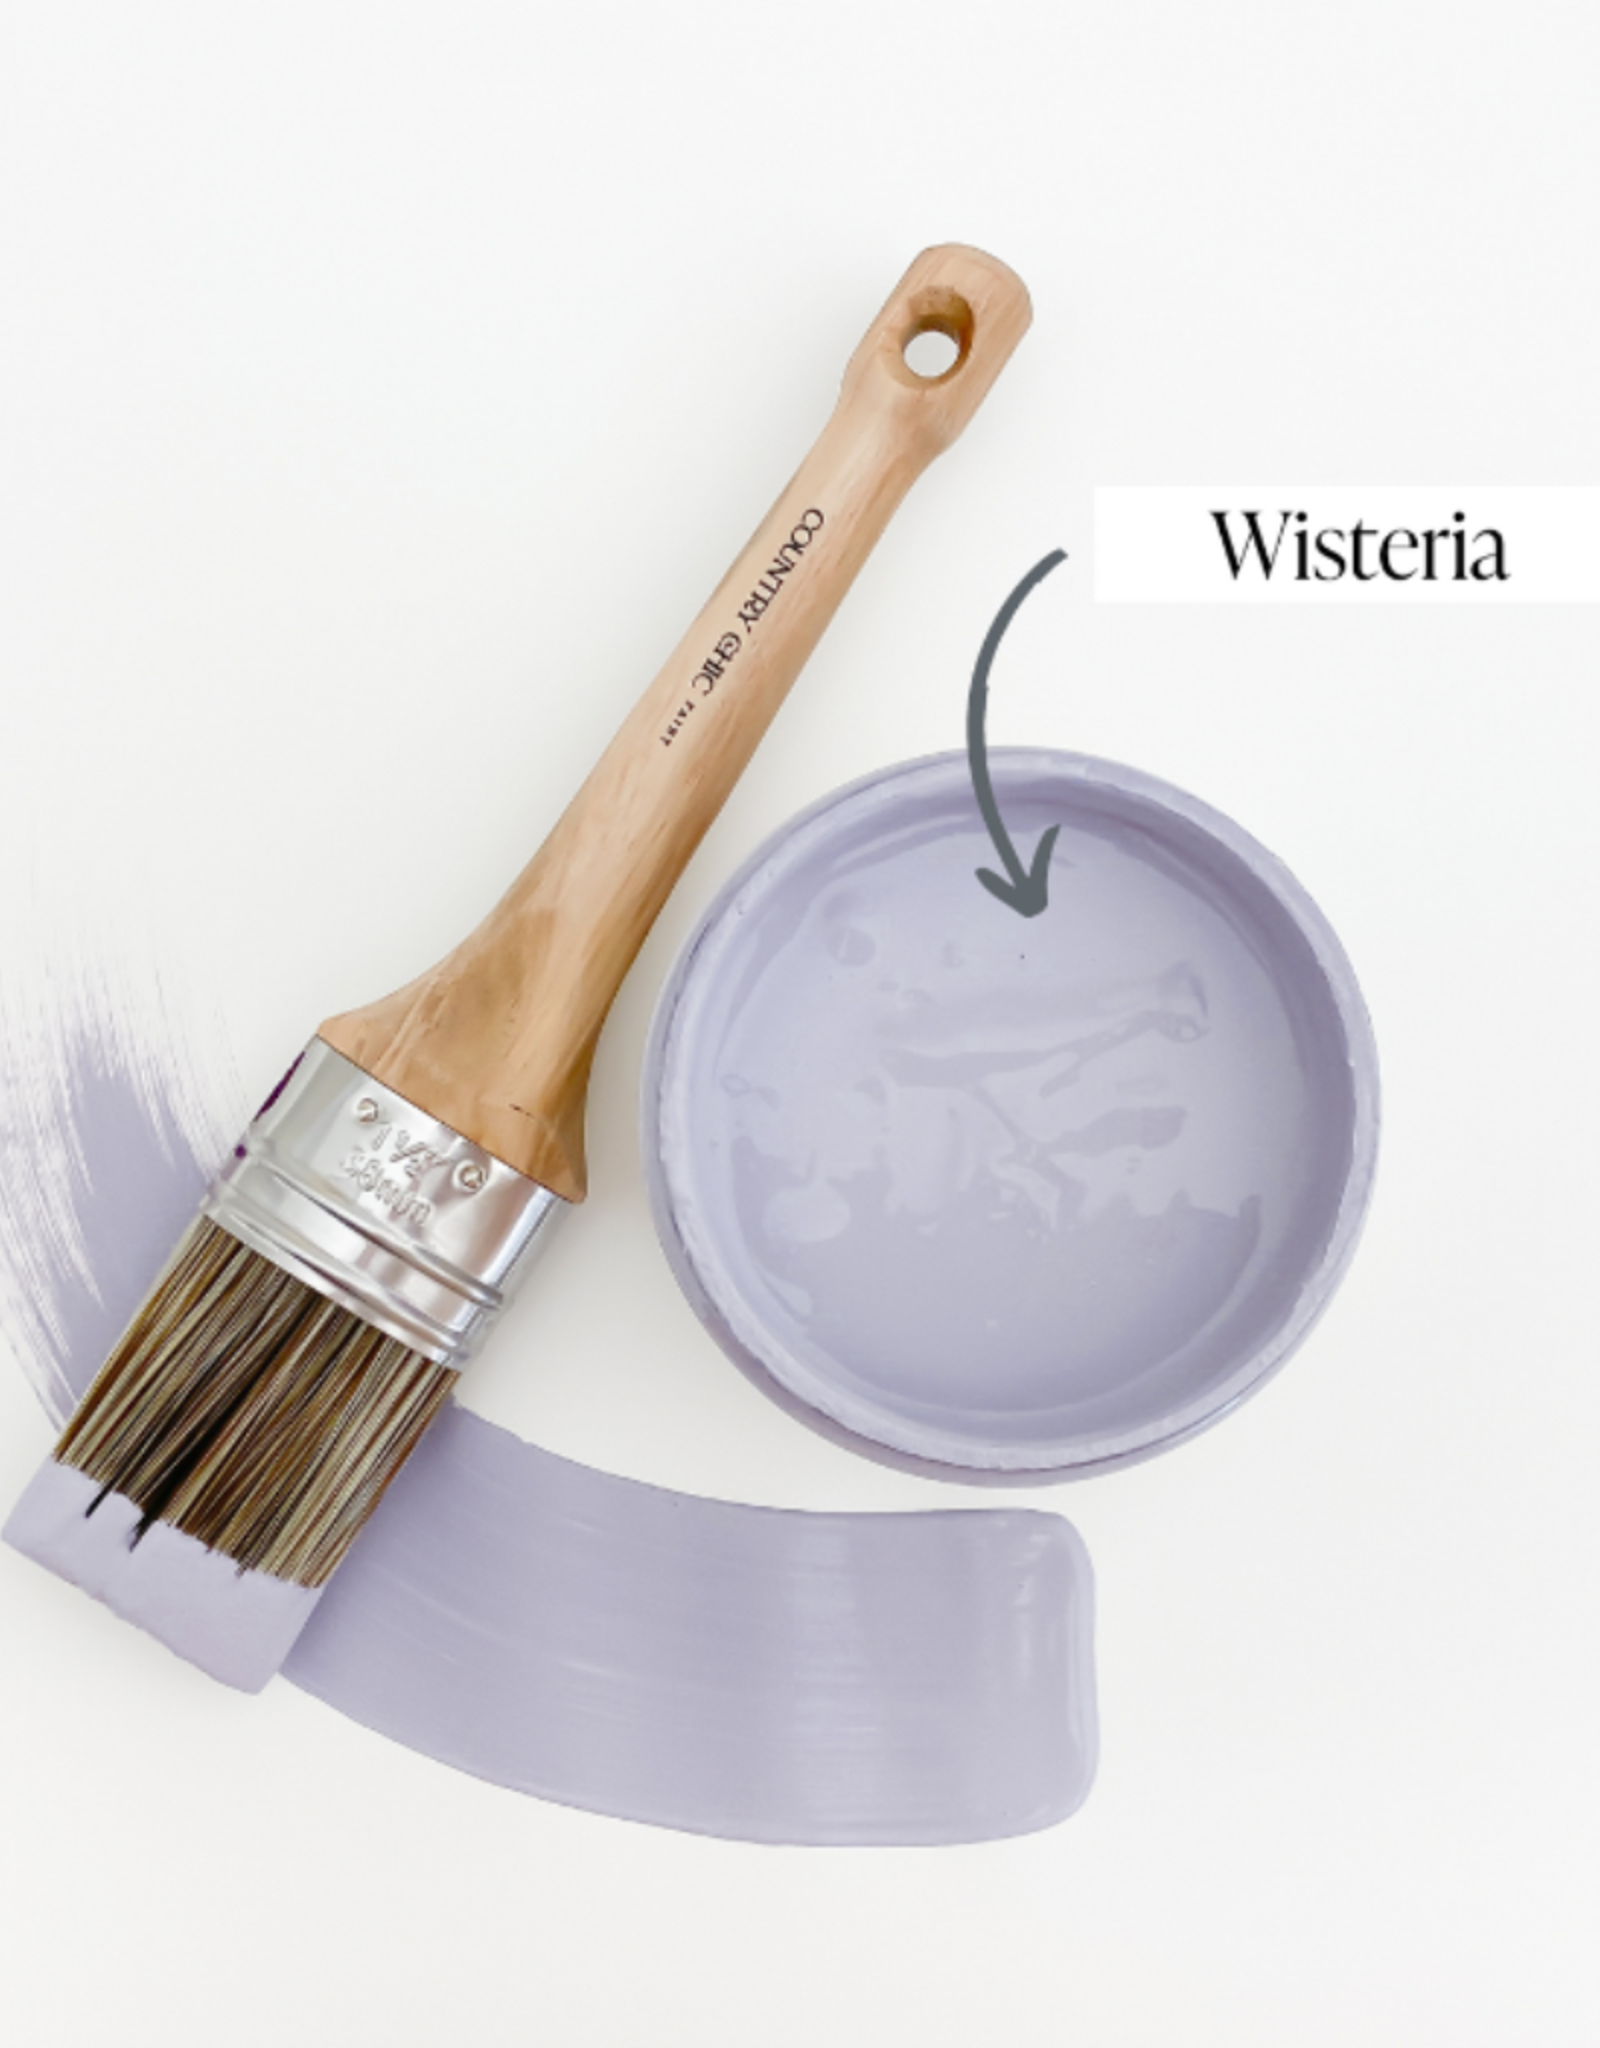 Country Chic Country Chic Paint Sample - 4oz Wisteria